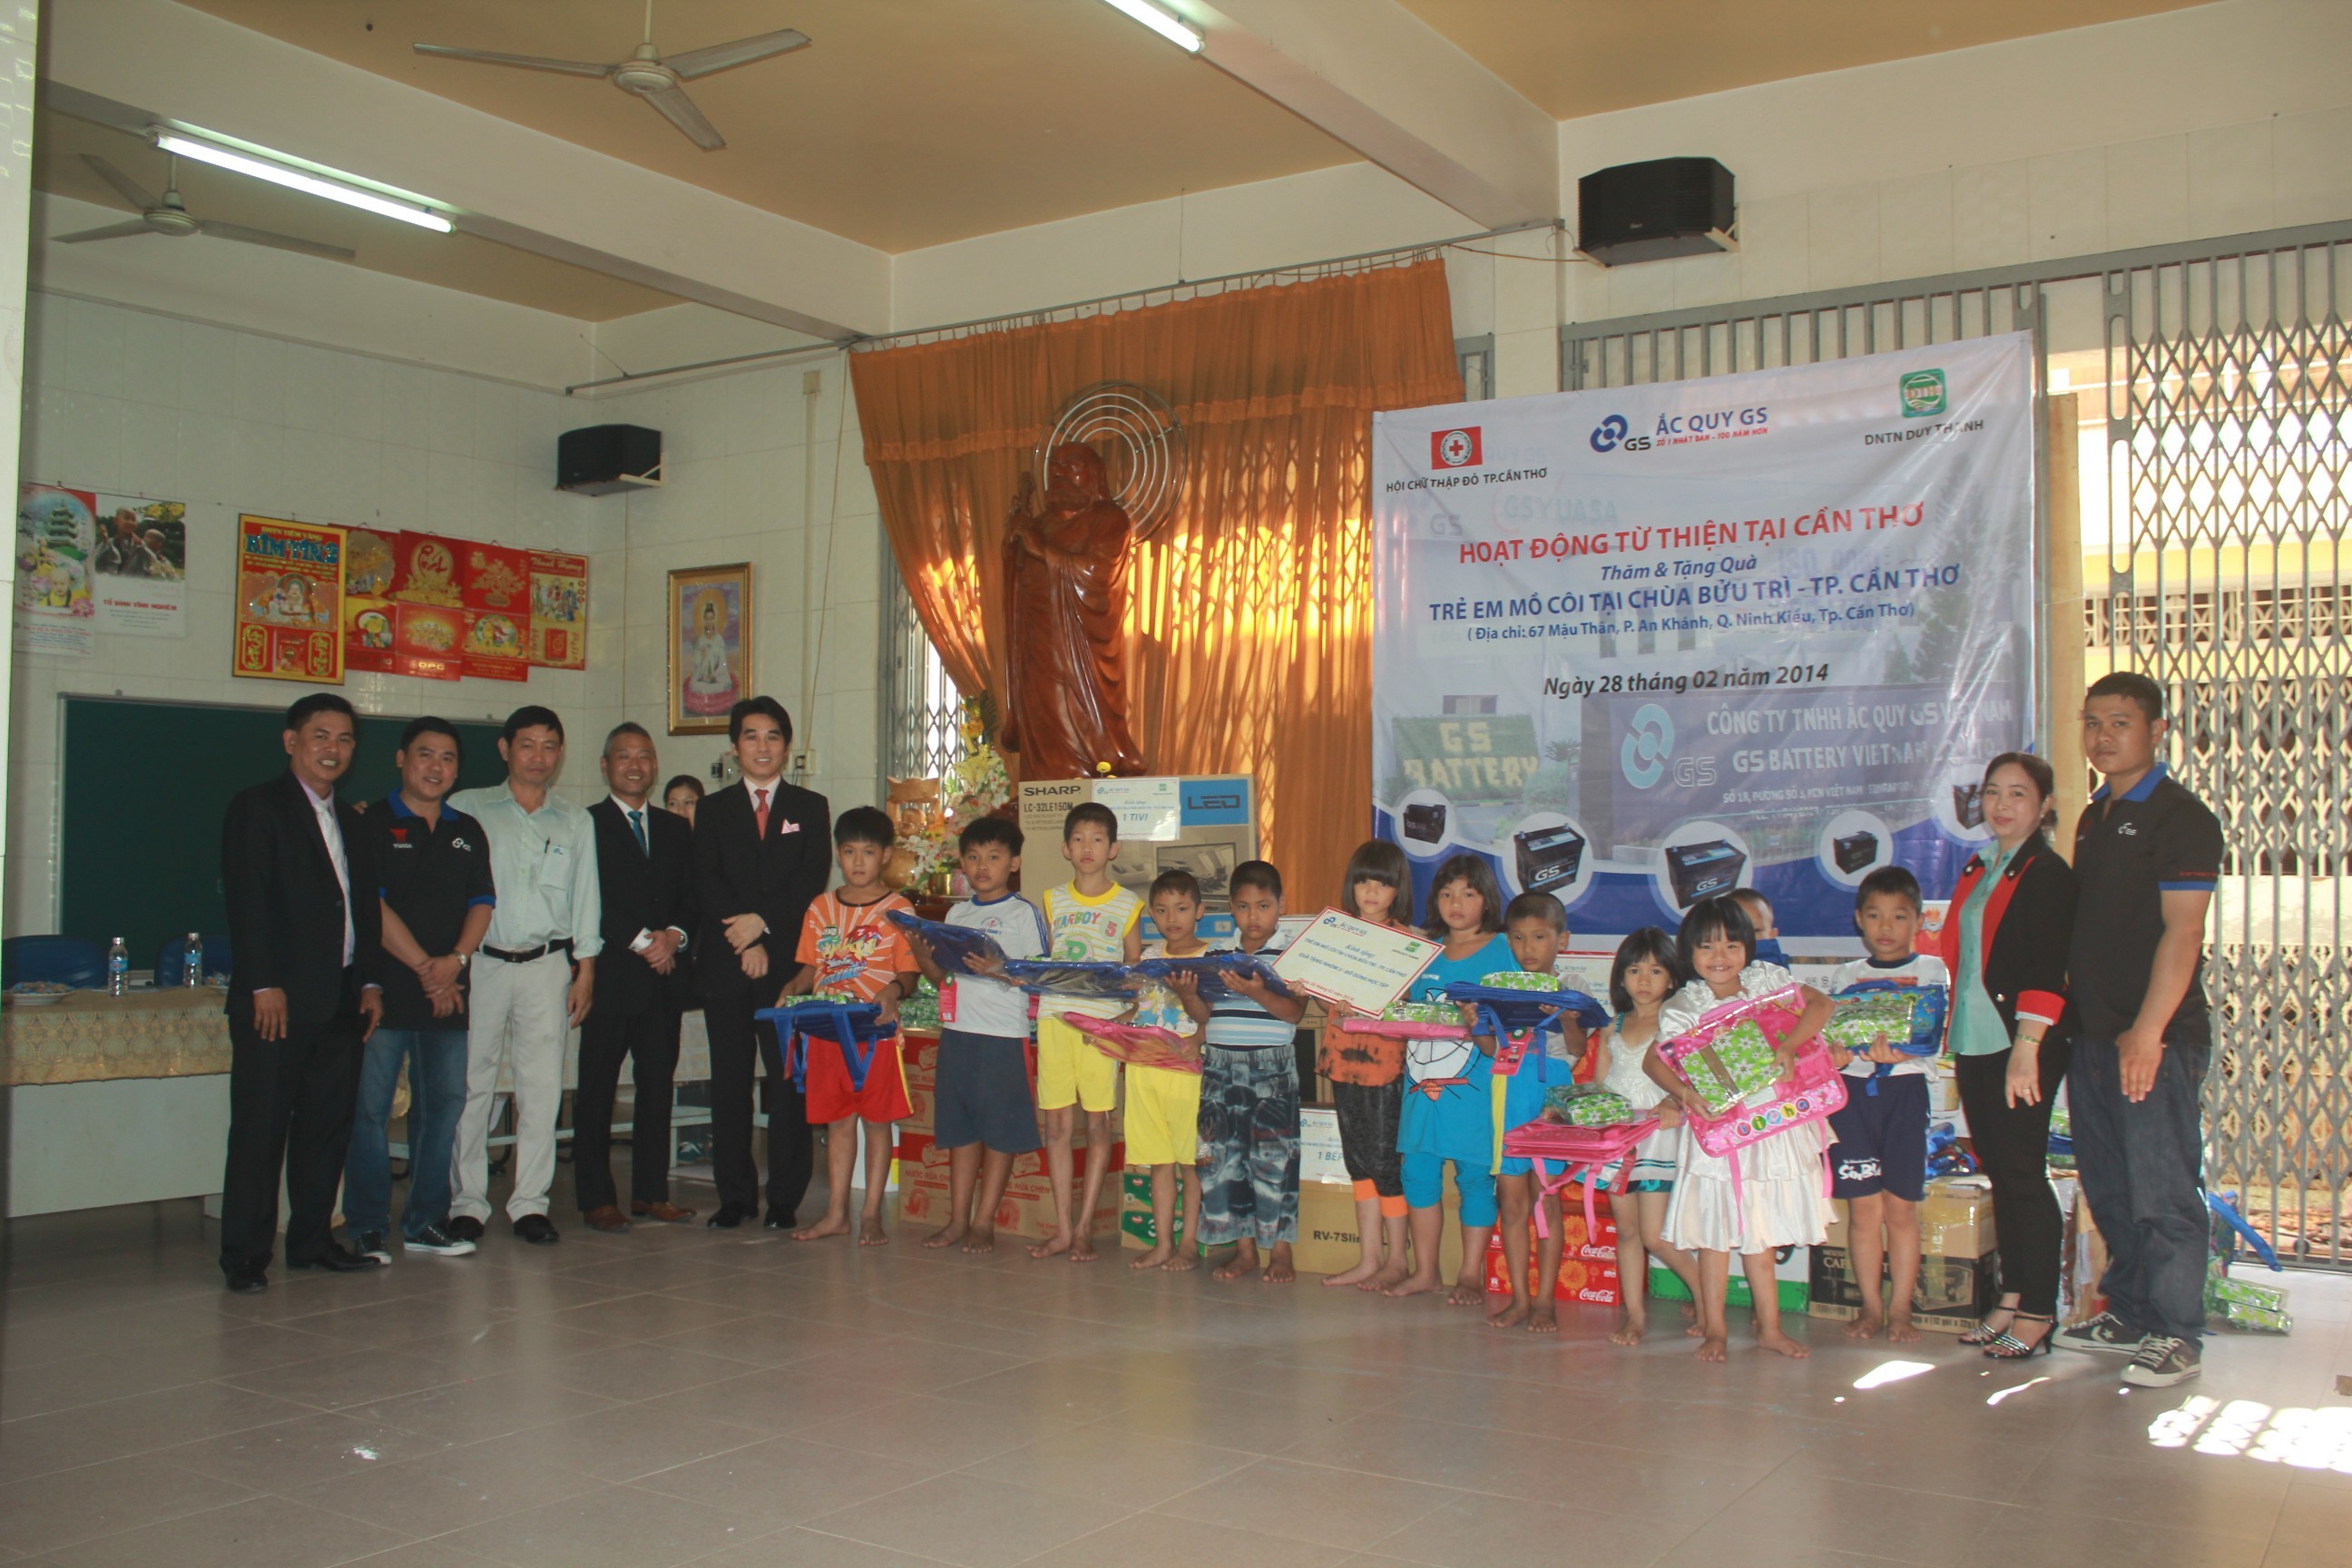 GSV CORPORATED DUY THANH DEALER HELD TO VISIT AND SEND GIFT TO ABANDONED CHILDREN IN BUU TRI PAGODA.